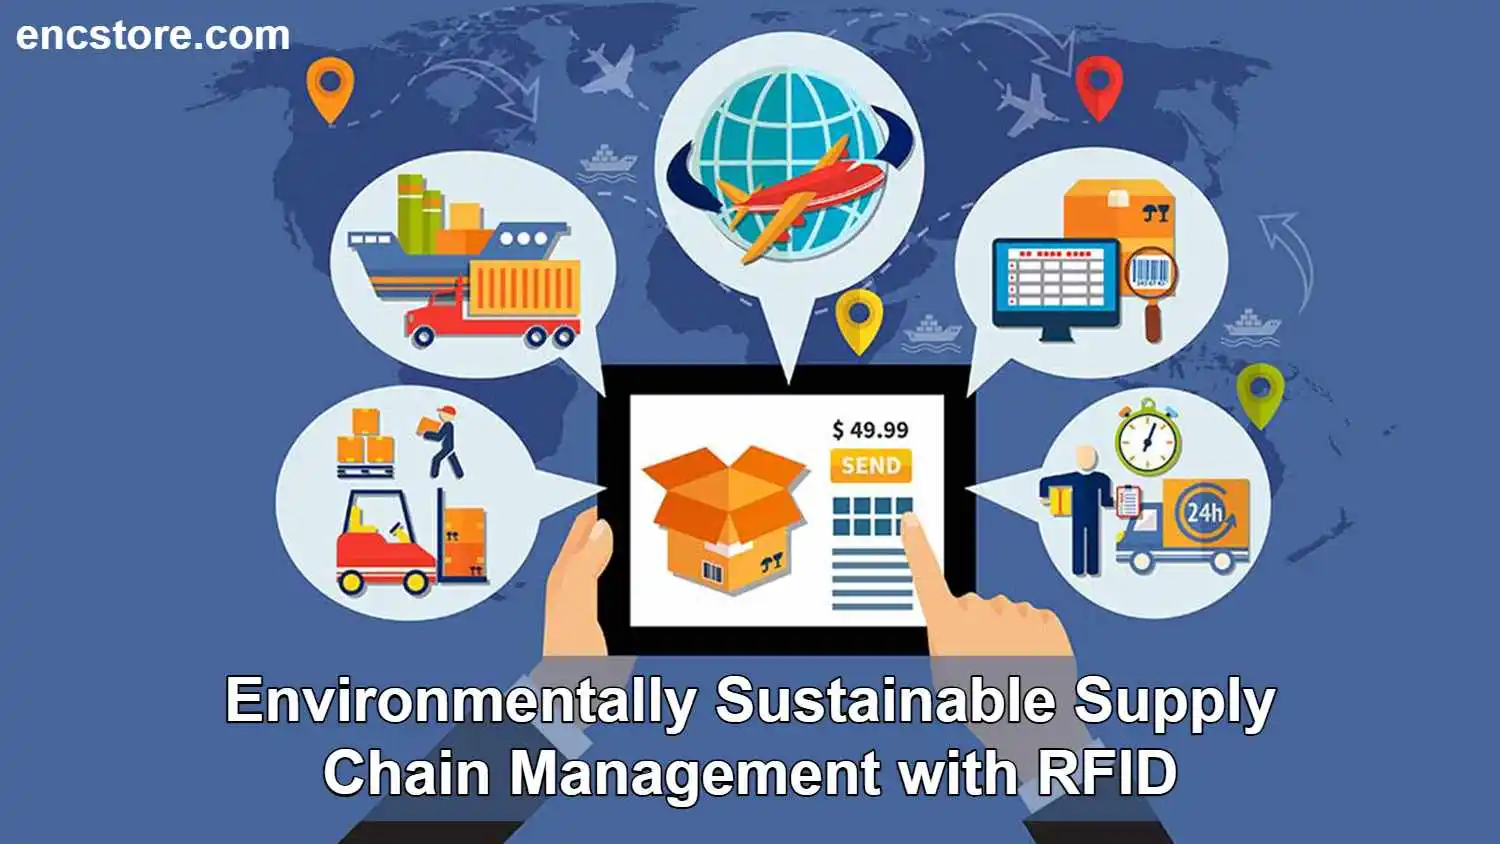 Supply Chain Management with RFID